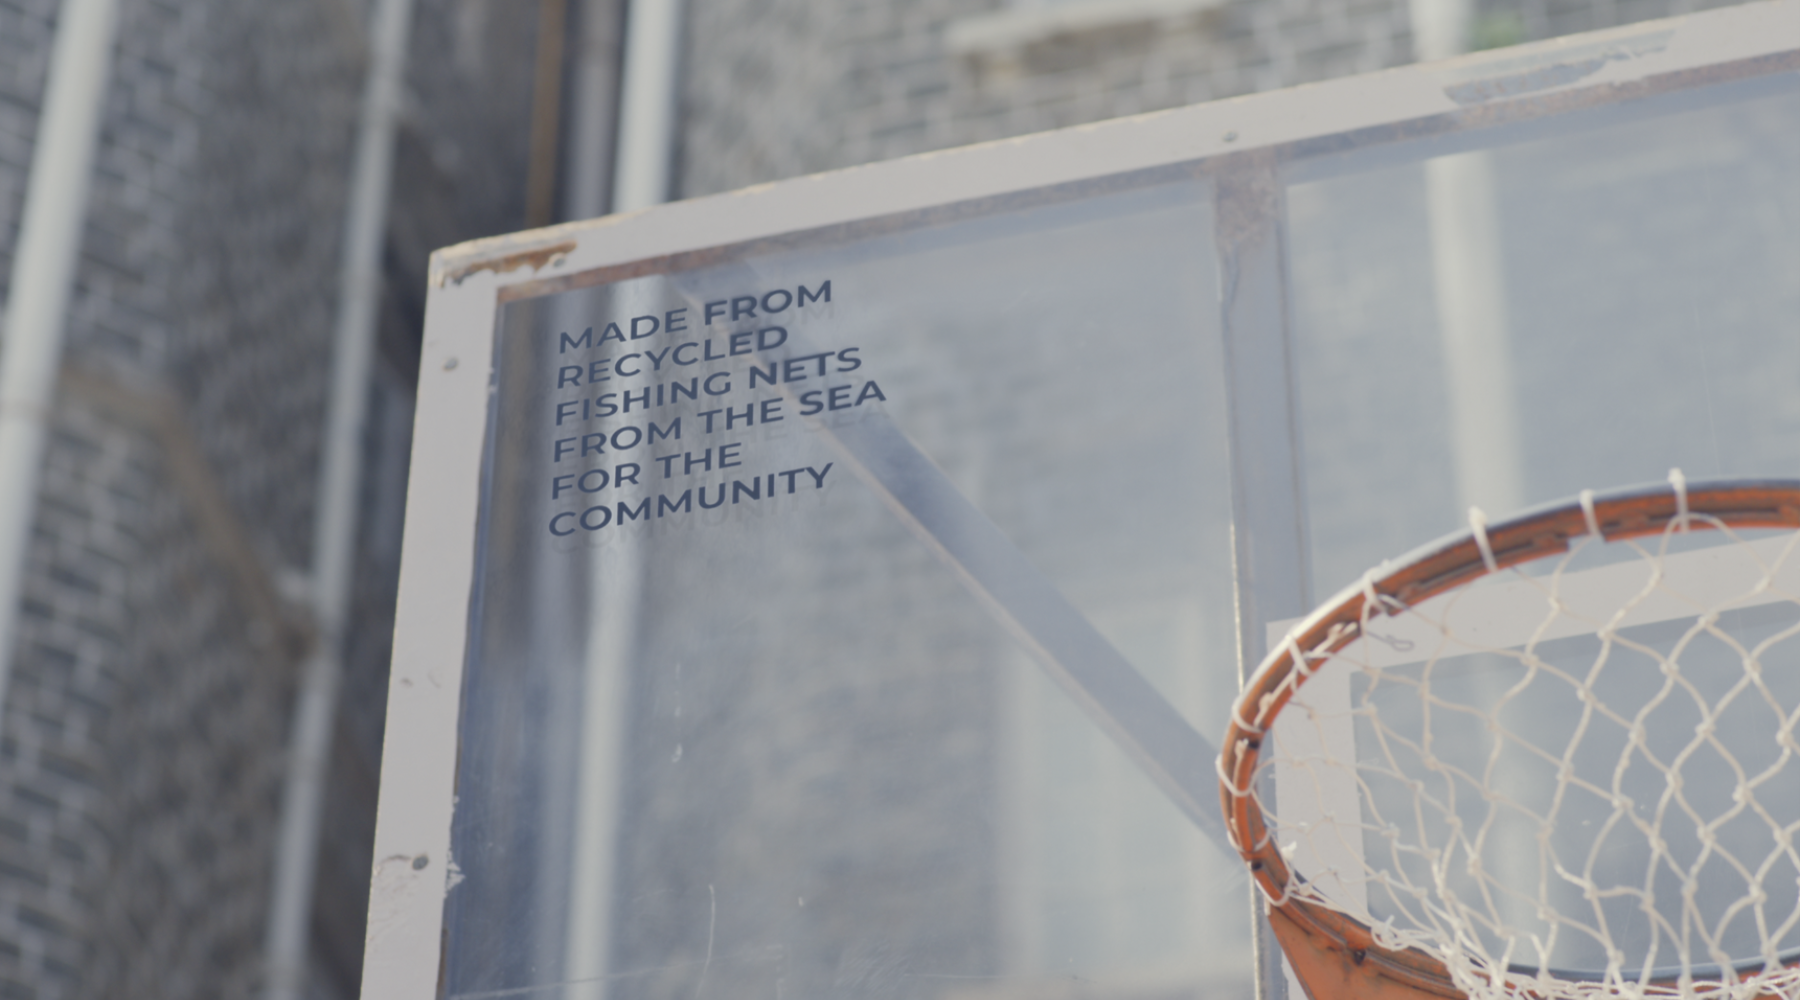 From the Seas to the Community, NBA launches “Nets for Change” in India